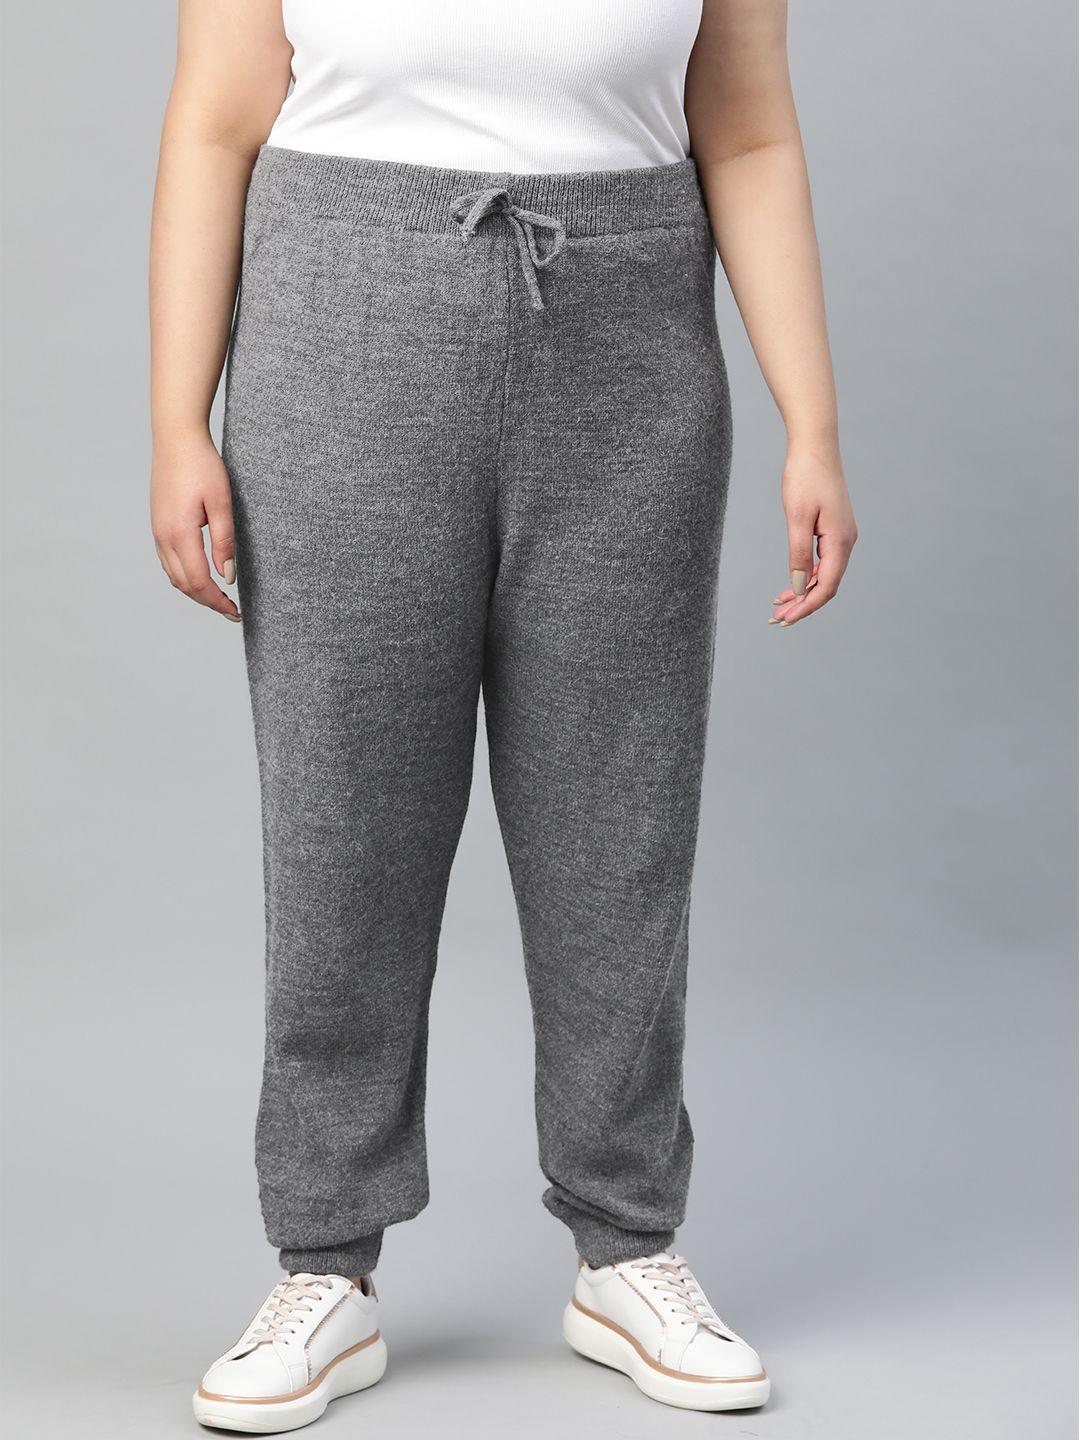 dorothy perkins women curve charcoal grey straight fit solid winter joggers